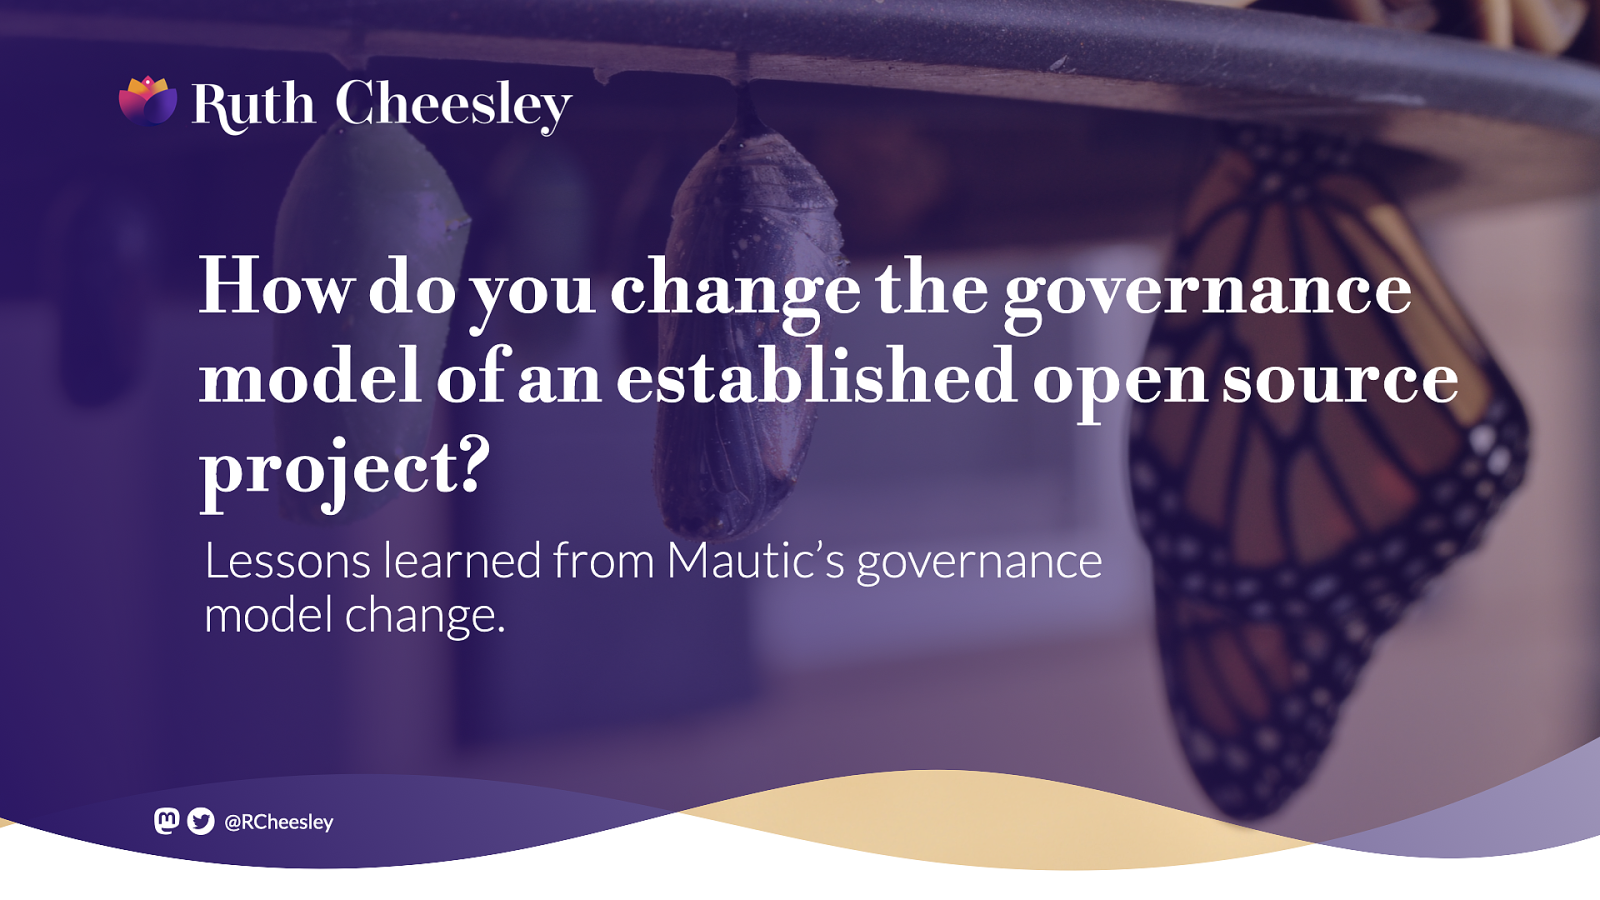 How do you change the governance model of an established open source project?